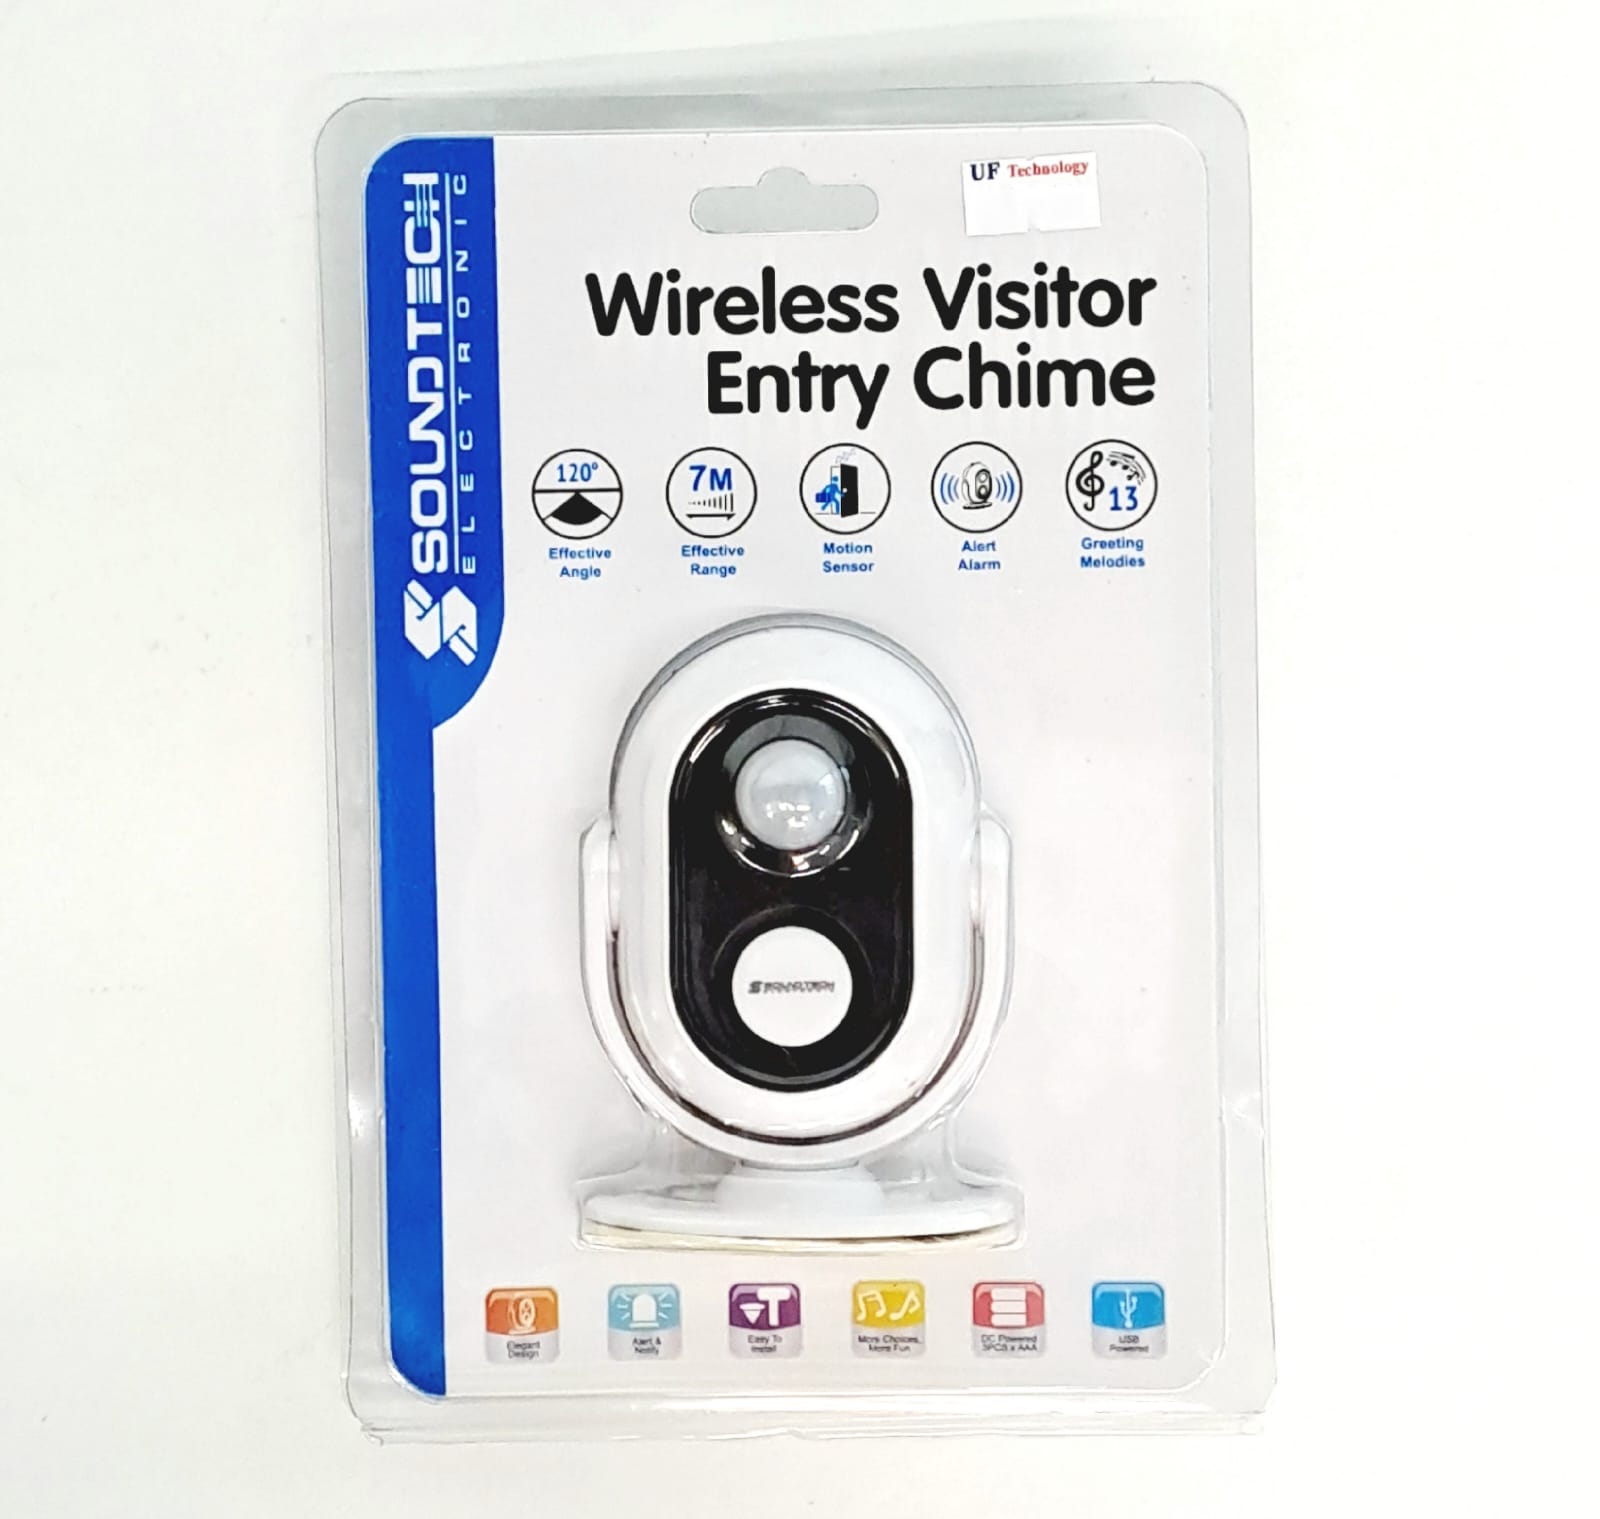 Soundtech Wireless Visitor Entry Chime